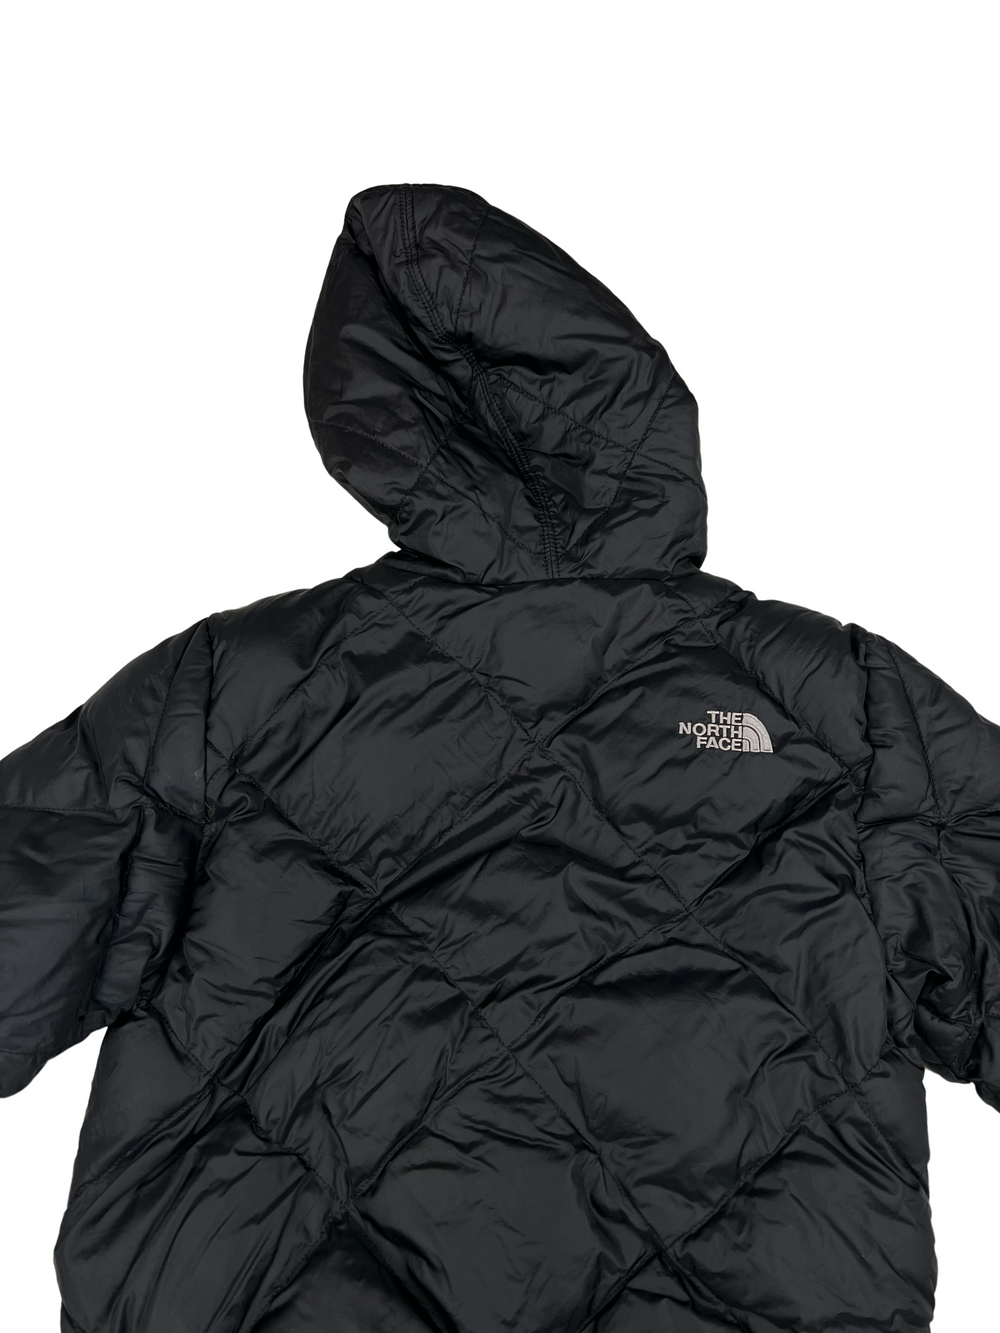 The North Face Nuptse 550 Puffer Jacket 2 in 1 (XS)